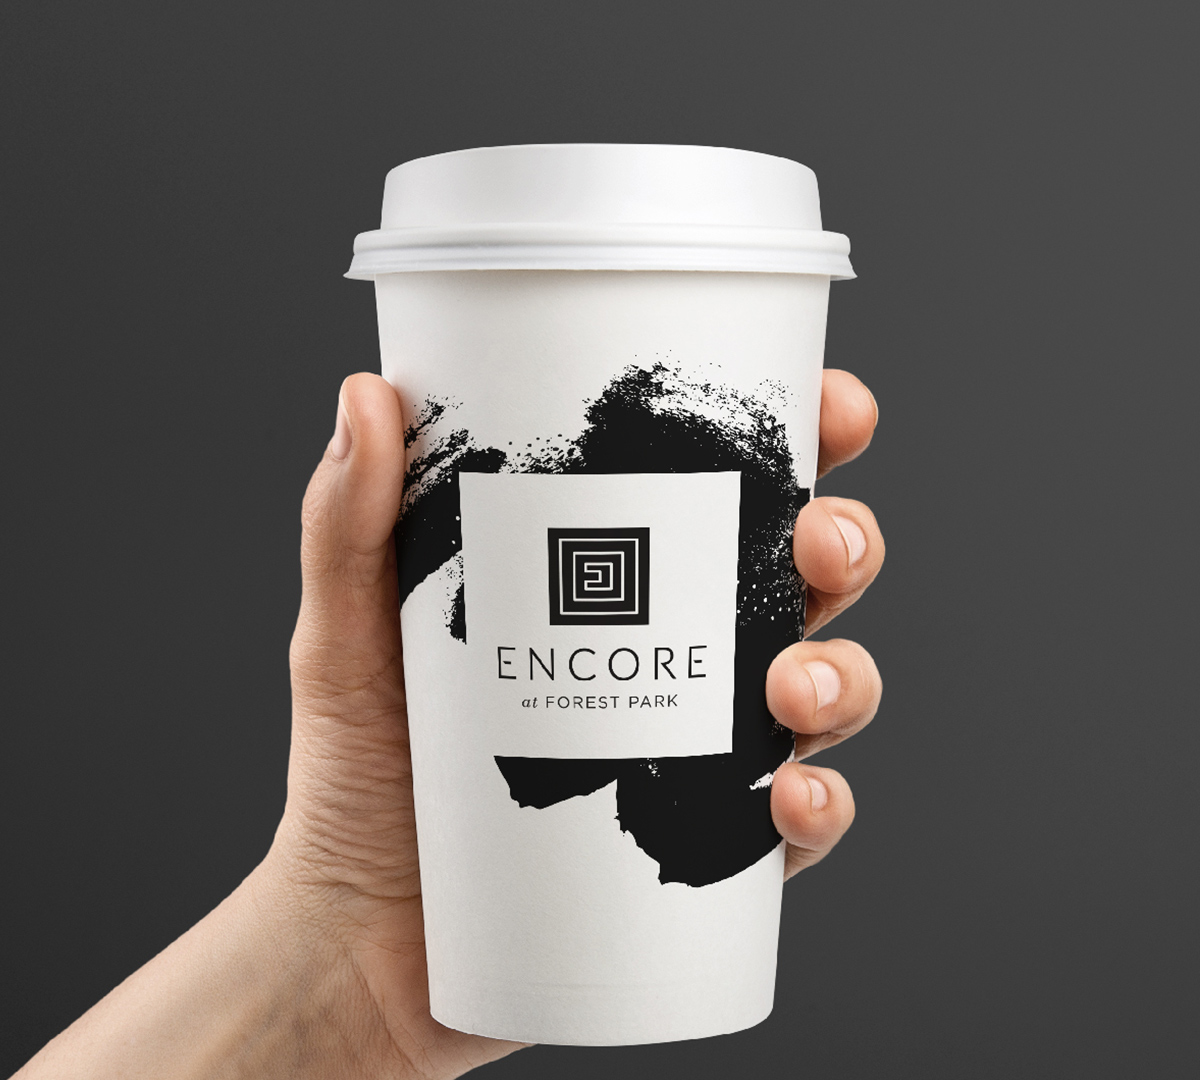  Encore at Forest Park branded coffee cup